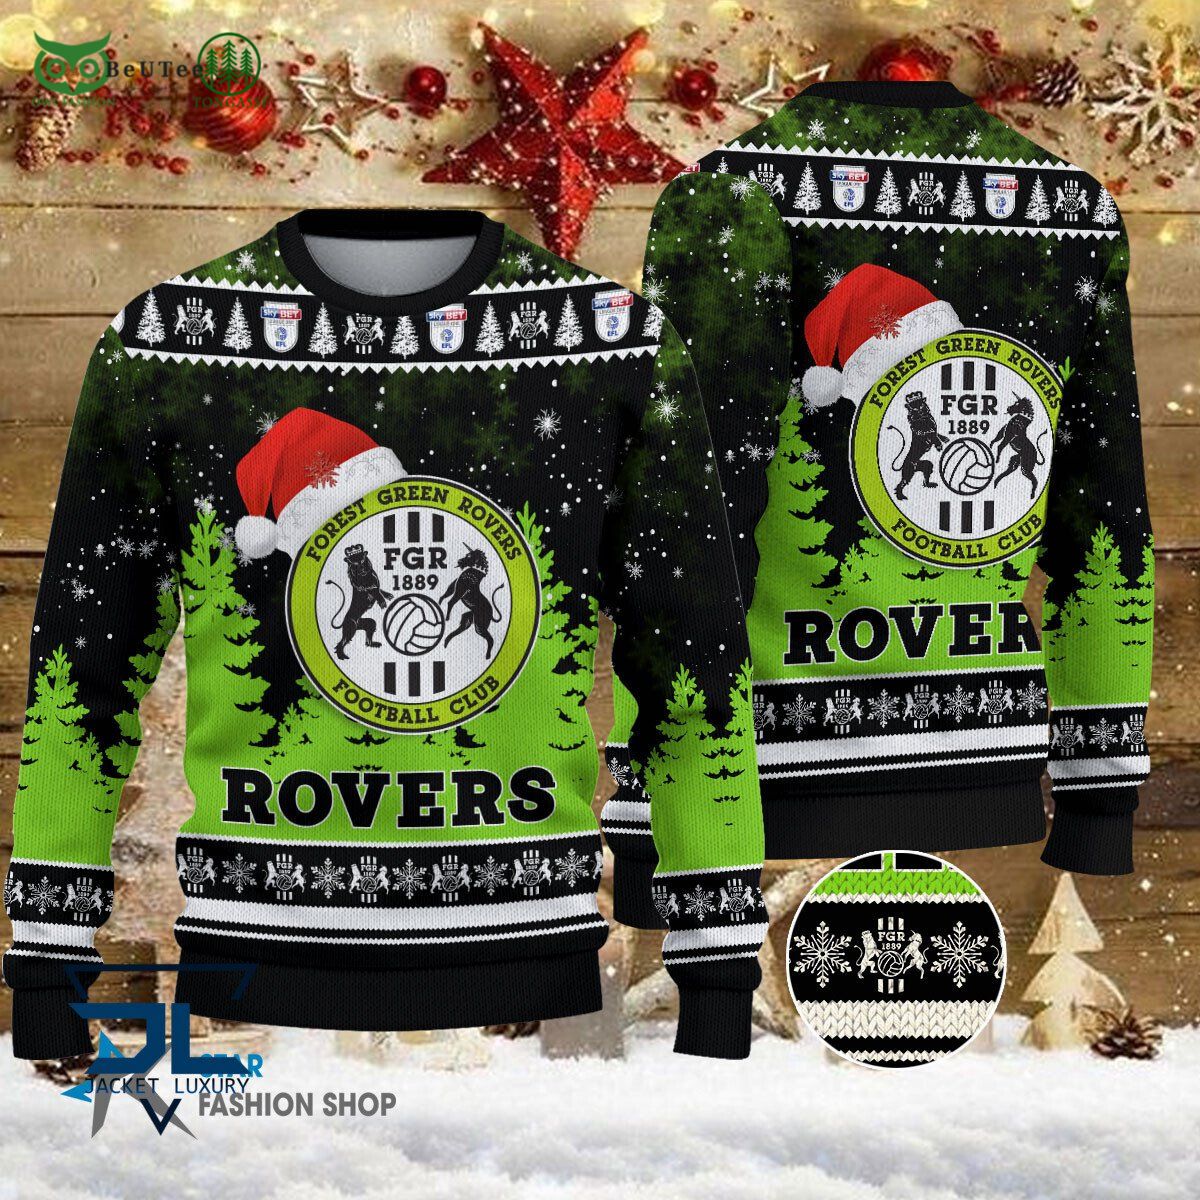 forest green rovers efl english football league premium ugly sweater 1 uZqAG